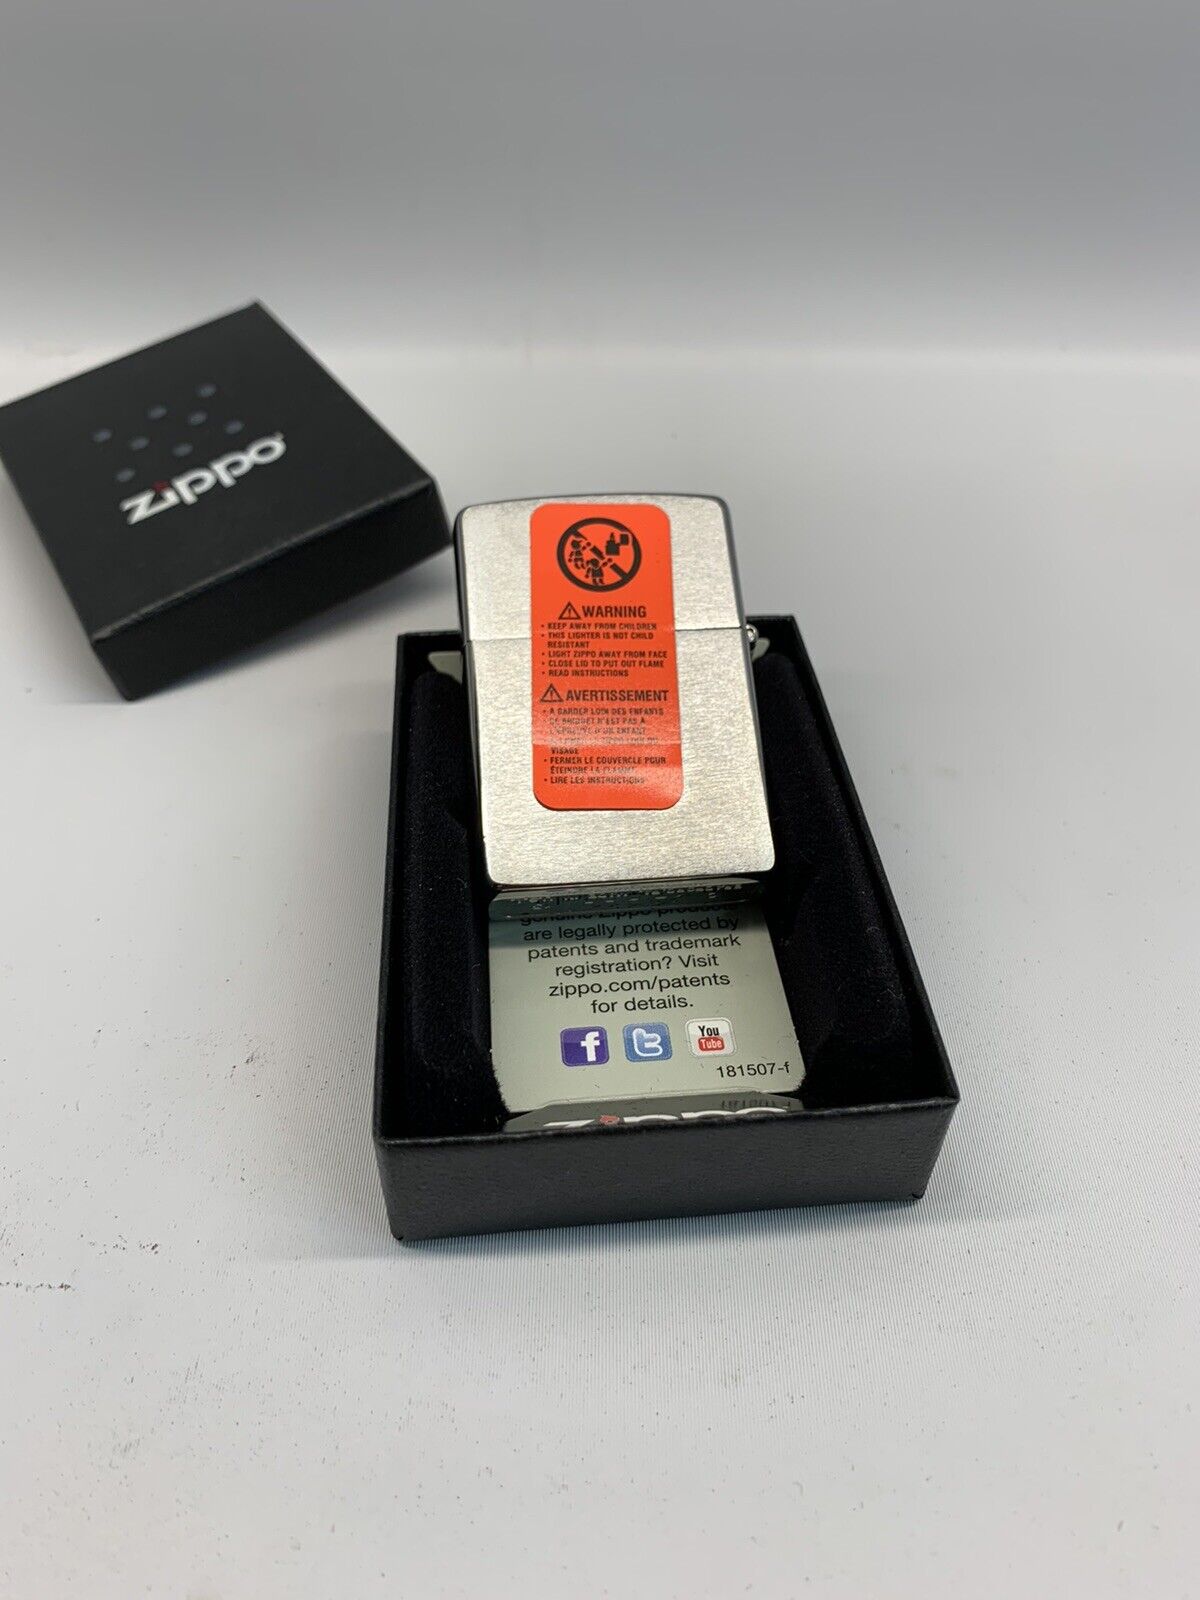 Golden Leaf Zippo Lighter Sealed In Box 2013. Some light scratches on face.